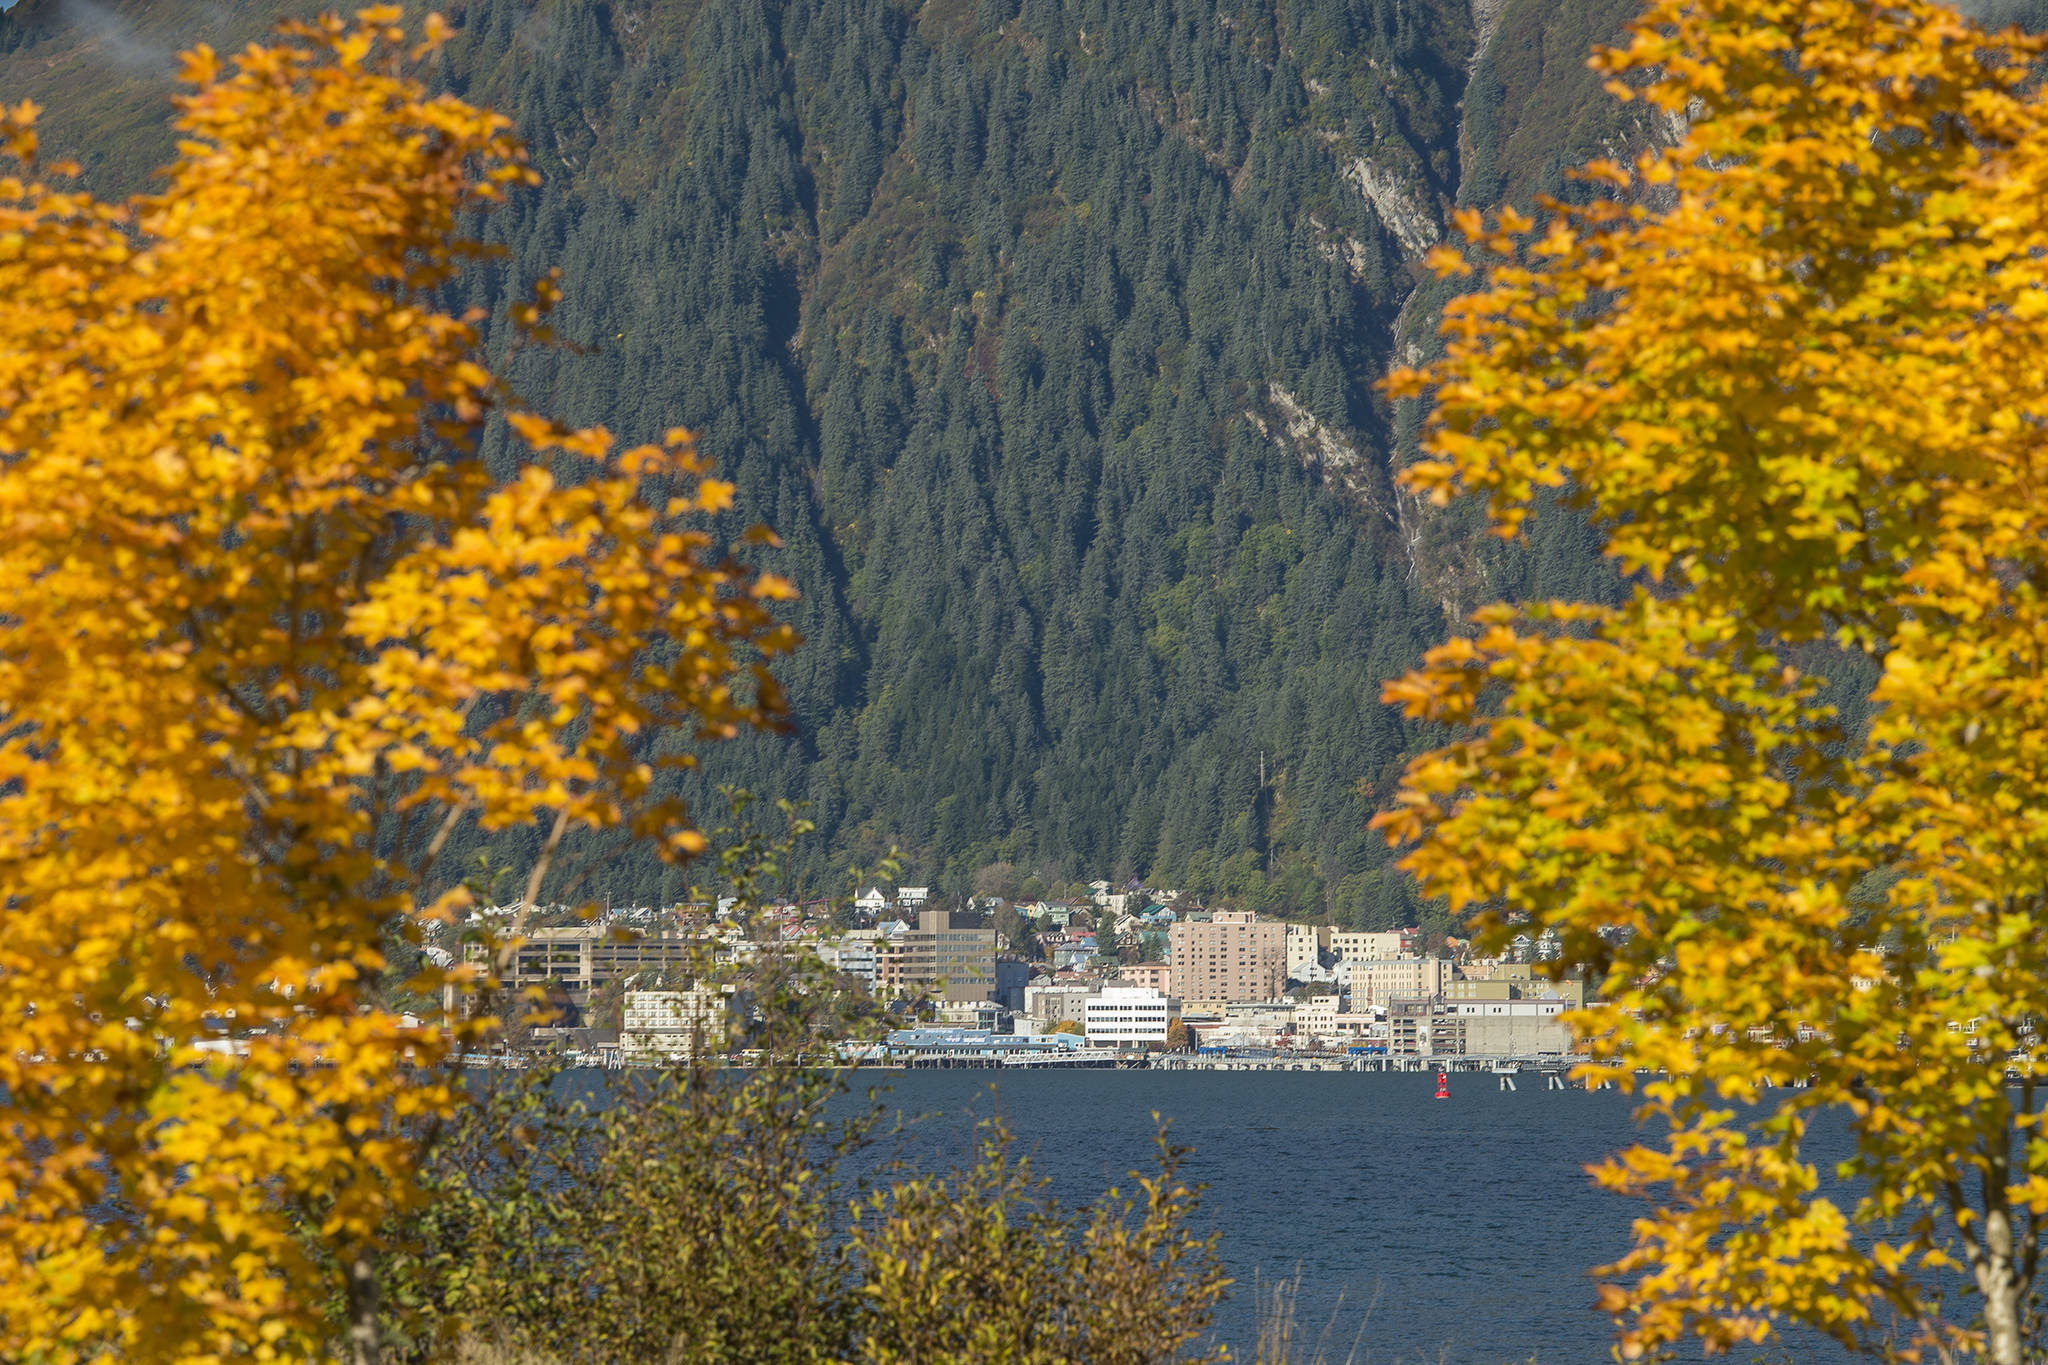 Downtown Juneau is seen through the changing color of tree leaves in Douglas on Monday, Oct. 8, 2018. (Michael Penn | Juneau Empire)